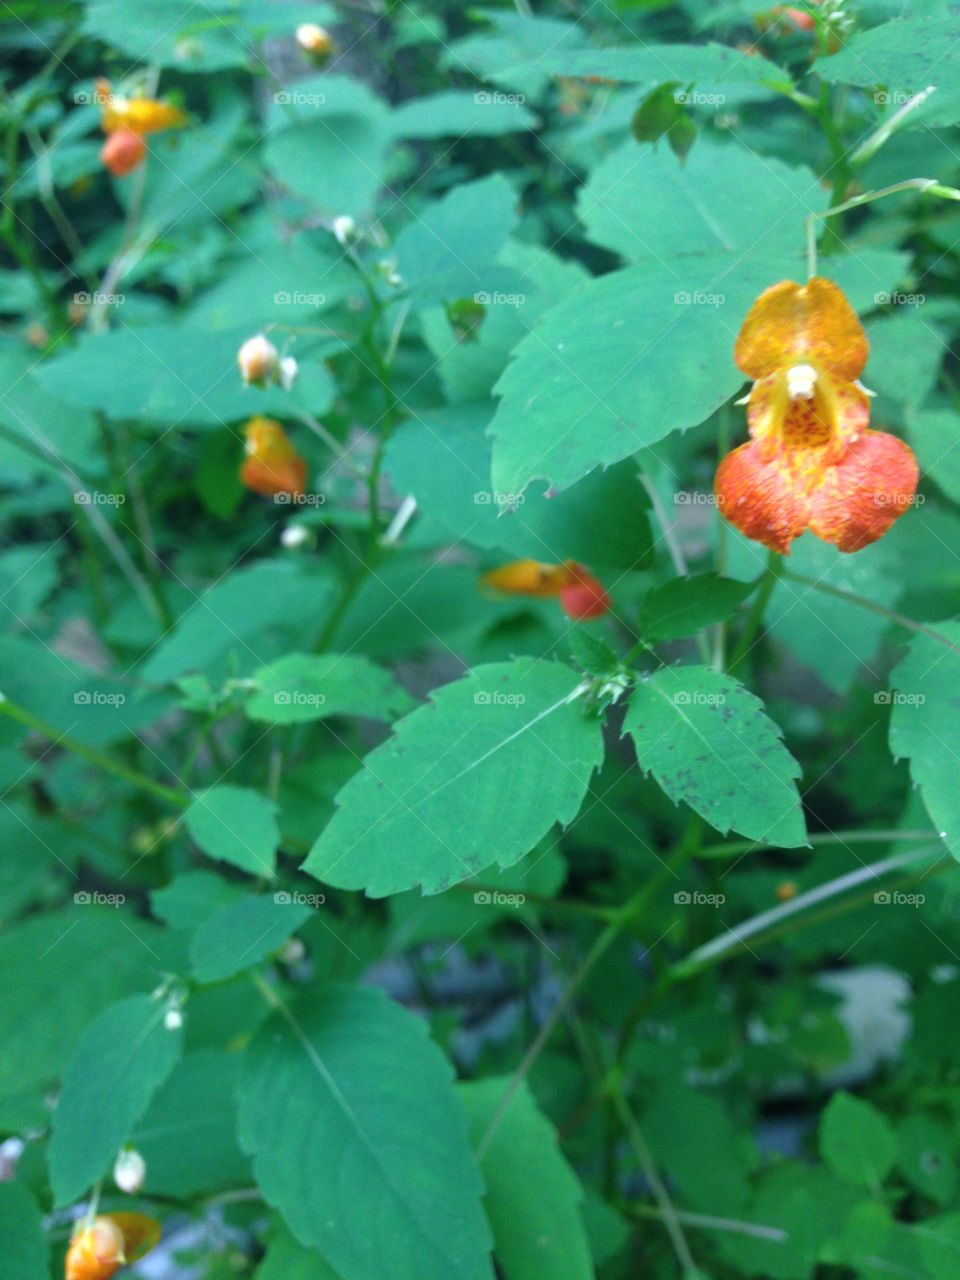 Jewel weed proving that weeds indeed can be beautiful